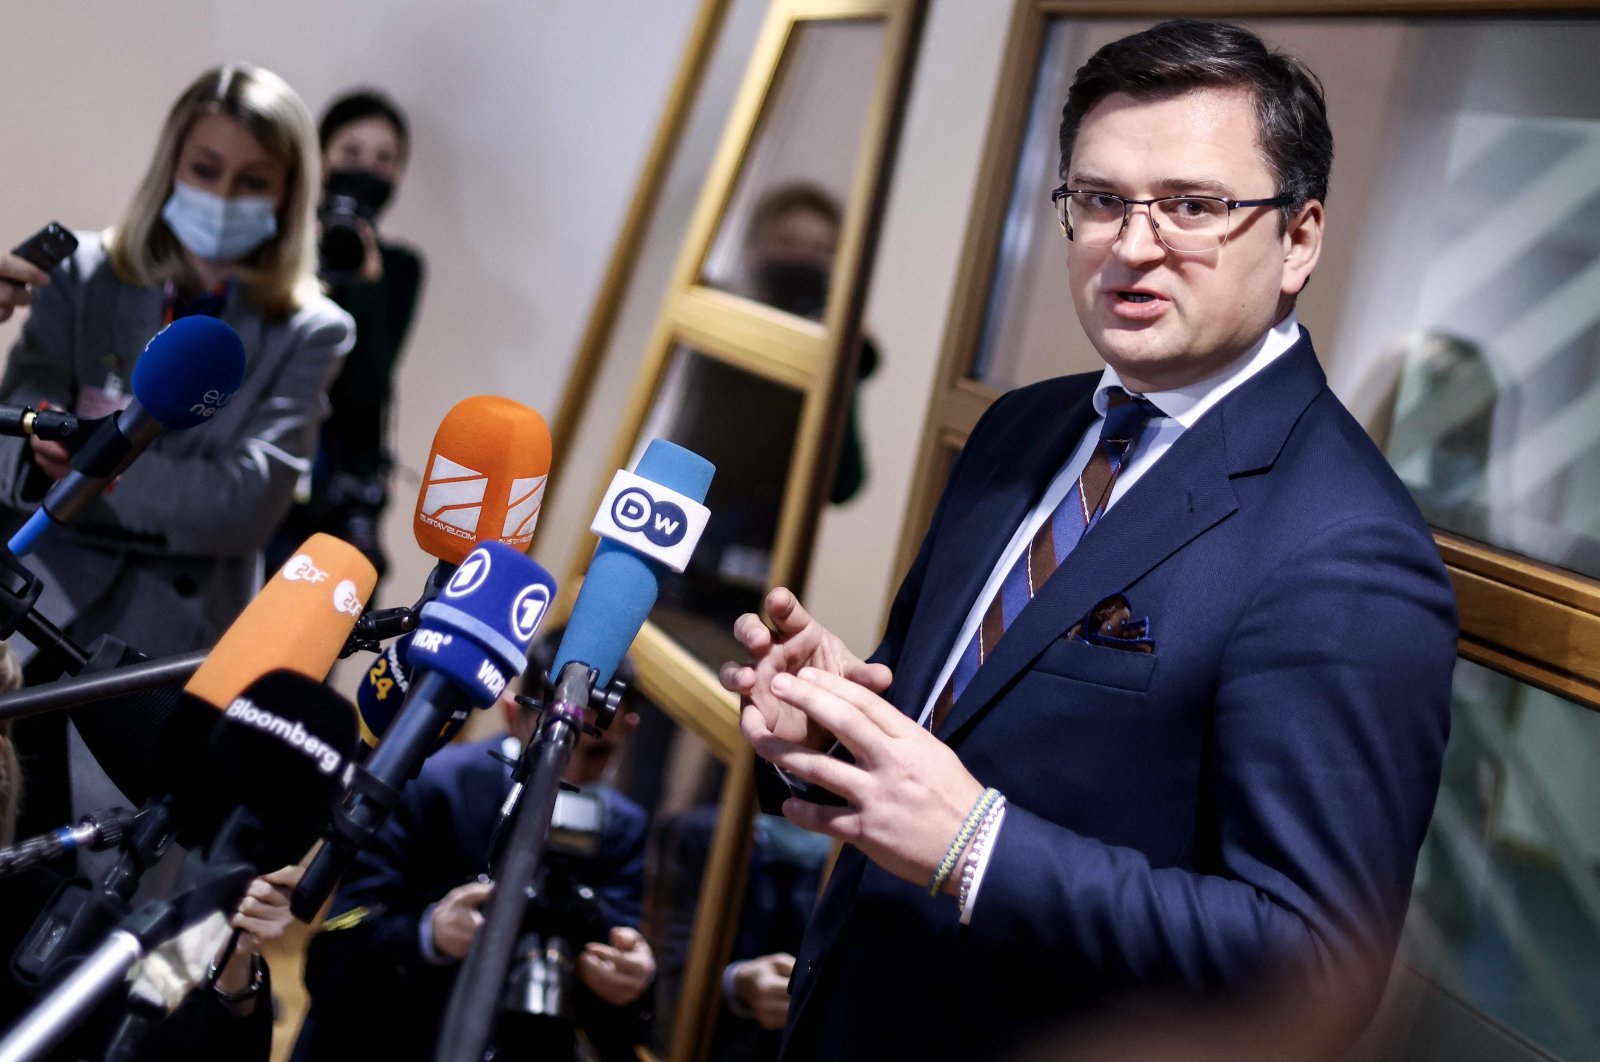 Ukrainian Foreign Minister Dmytro Kuleba speaks during a press conference after a Foreign Affairs Council meeting at the EU headquarters in Brussels, Belgium, on Feb. 21, 2022. (AFP Photo)